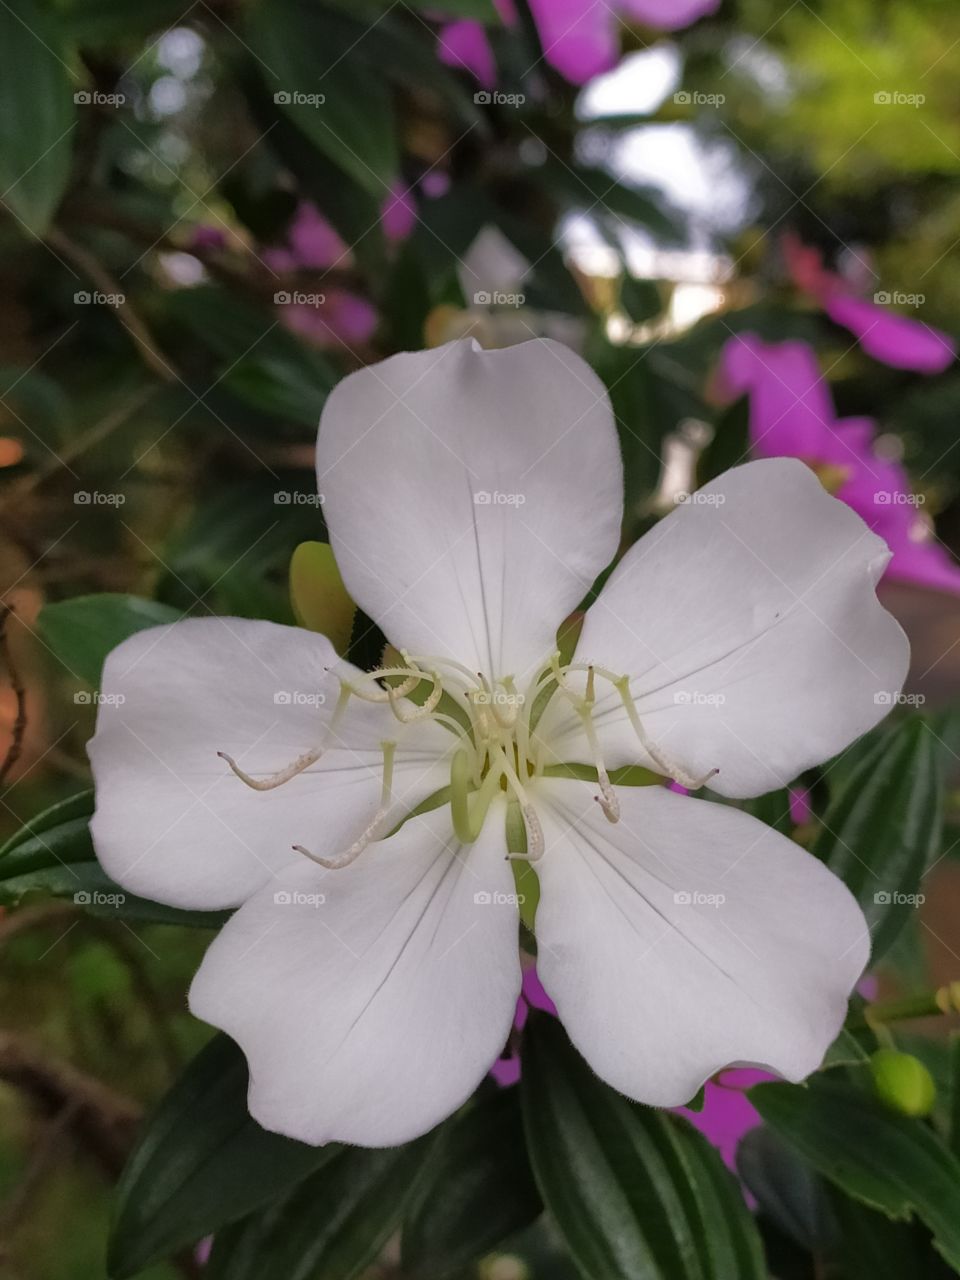 A white lovely flower in the garden in a rainy day